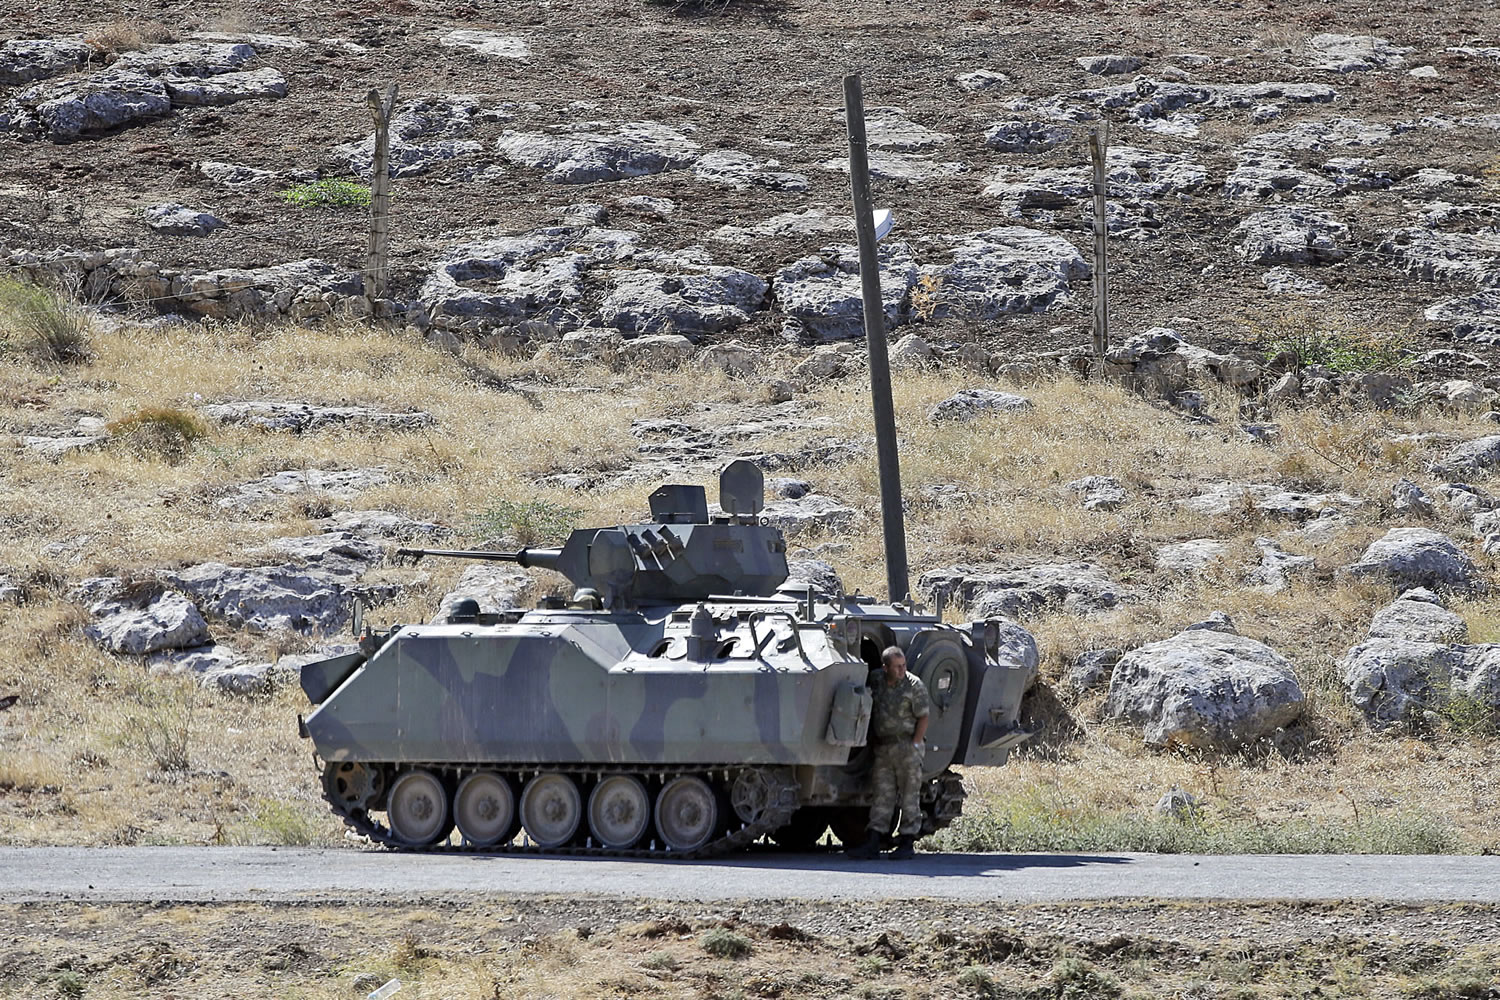 A Turkish soldier stands by a tank as he patrols the border with Syria, near Cilvegozu, Turkey, opn Wednesday.